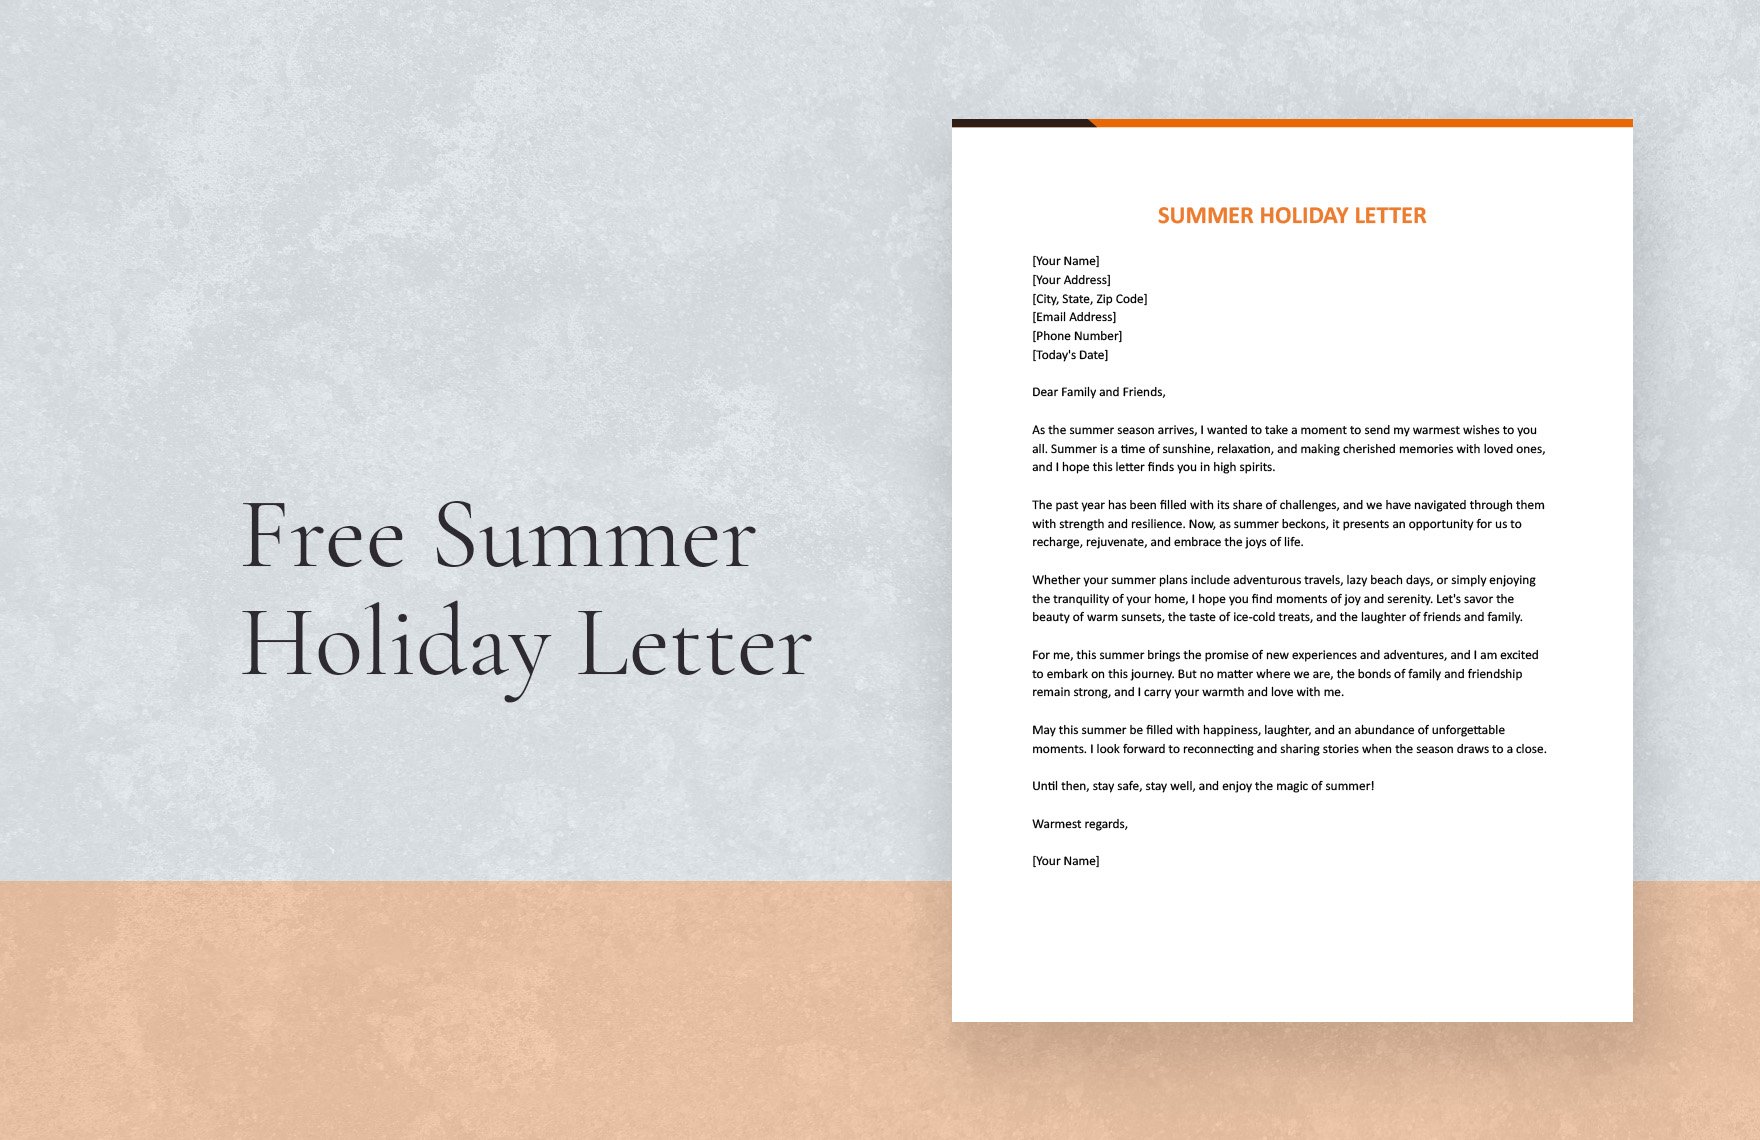 Summer Holiday Letter